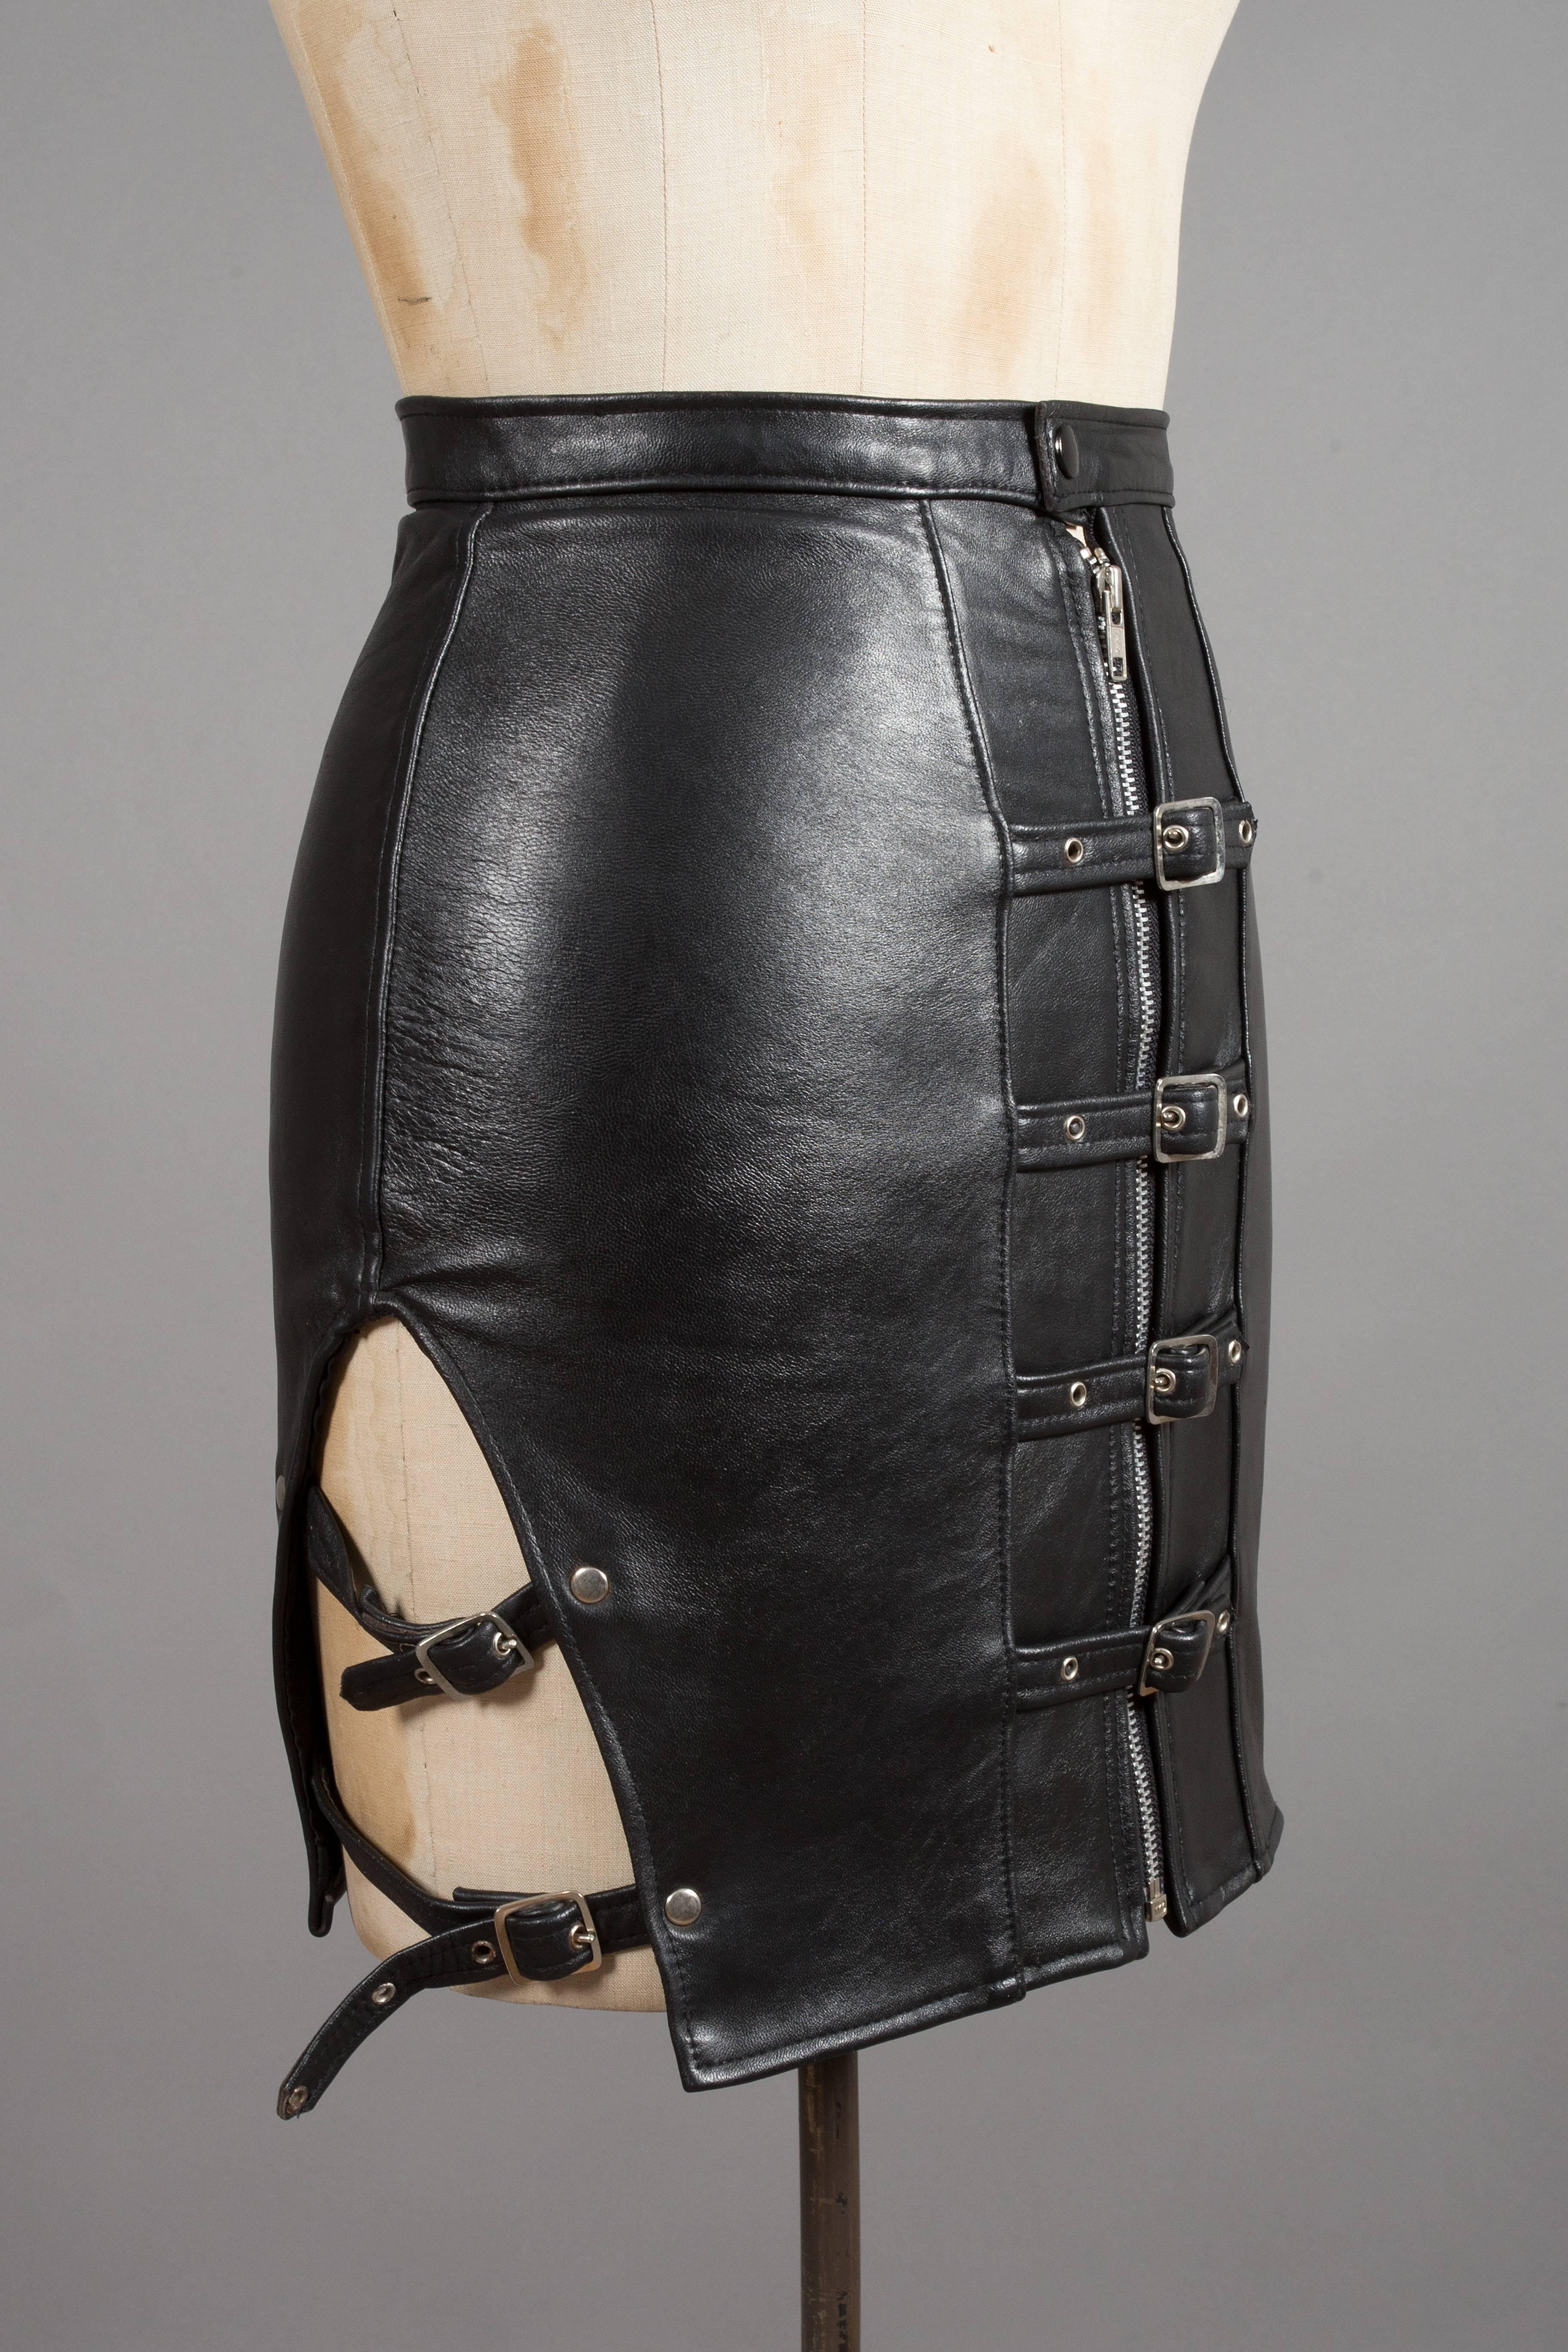 Original 1970s punk black leather mini skirt with side cut outs, large metal zipper closure and multiple buckle fastenings throughout. 

Waist 28